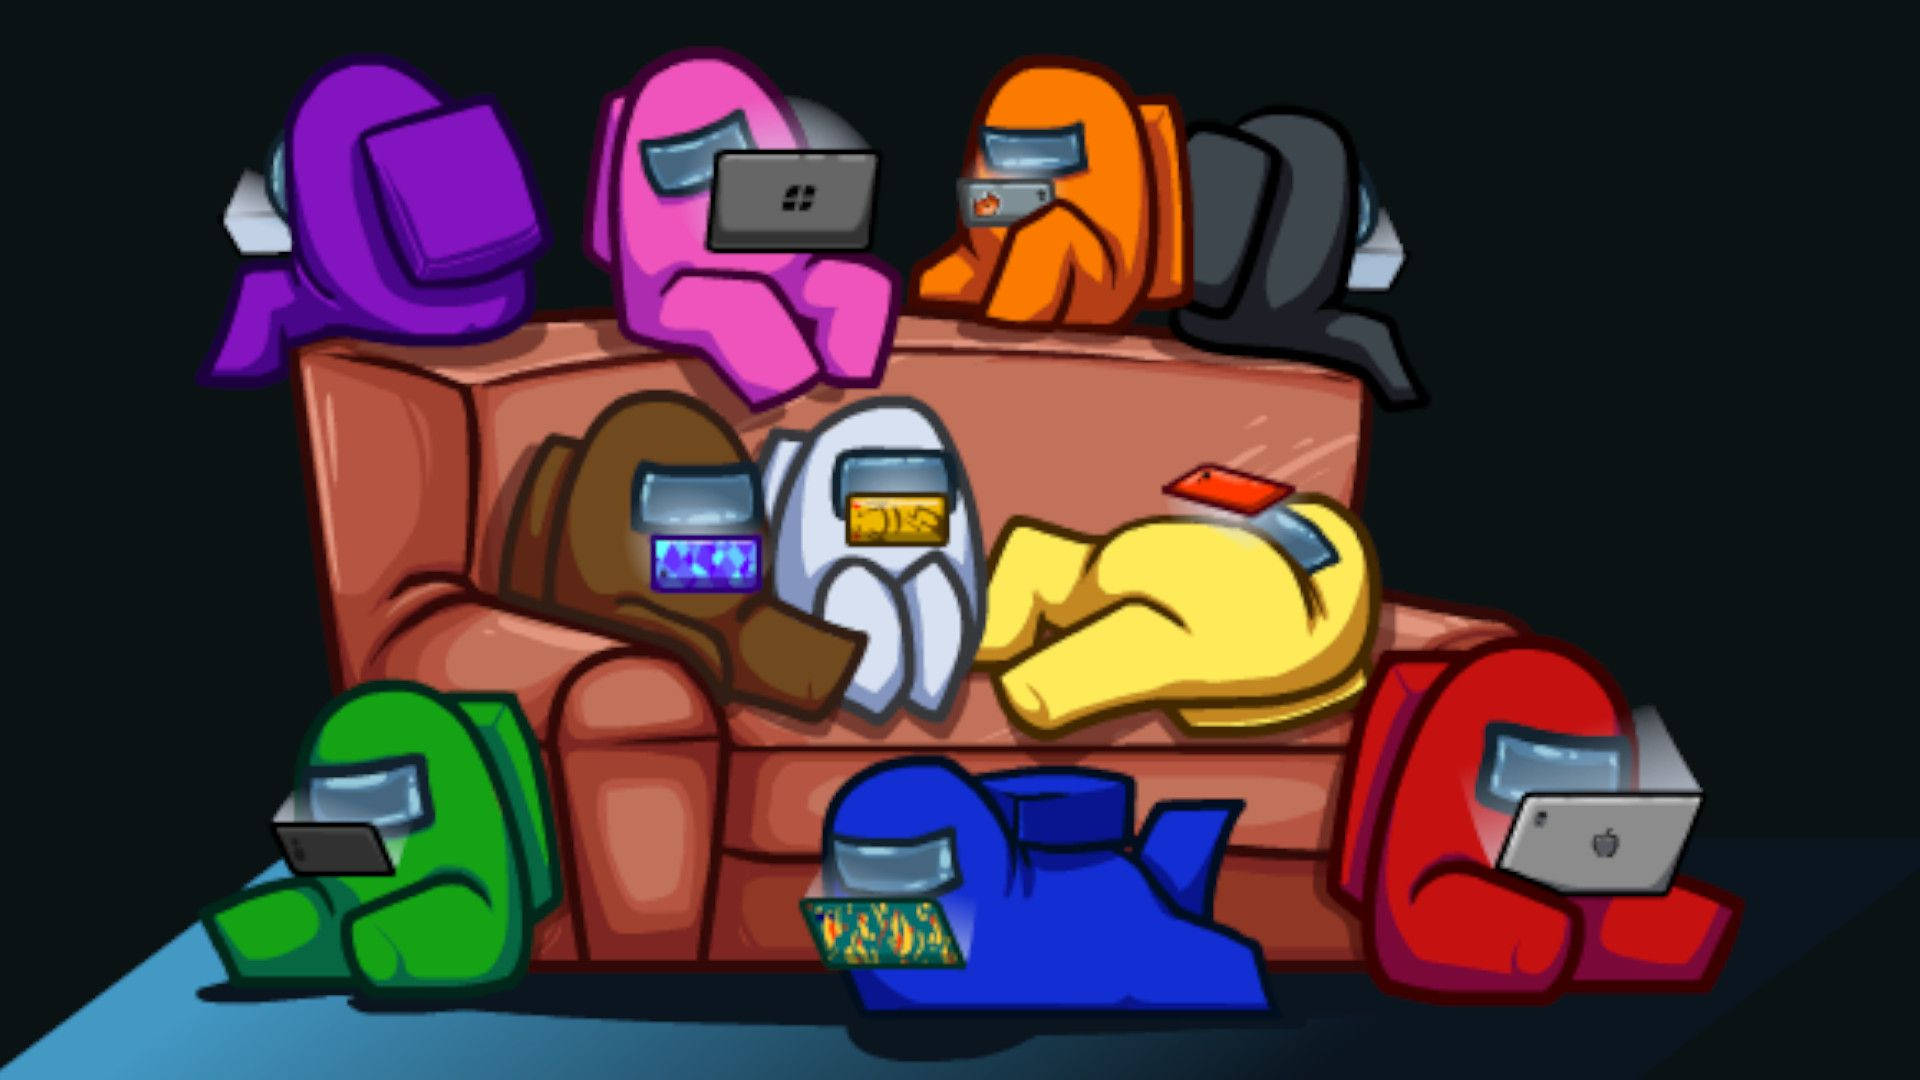 A Group Of People Sitting On A Couch With Laptops Wallpaper